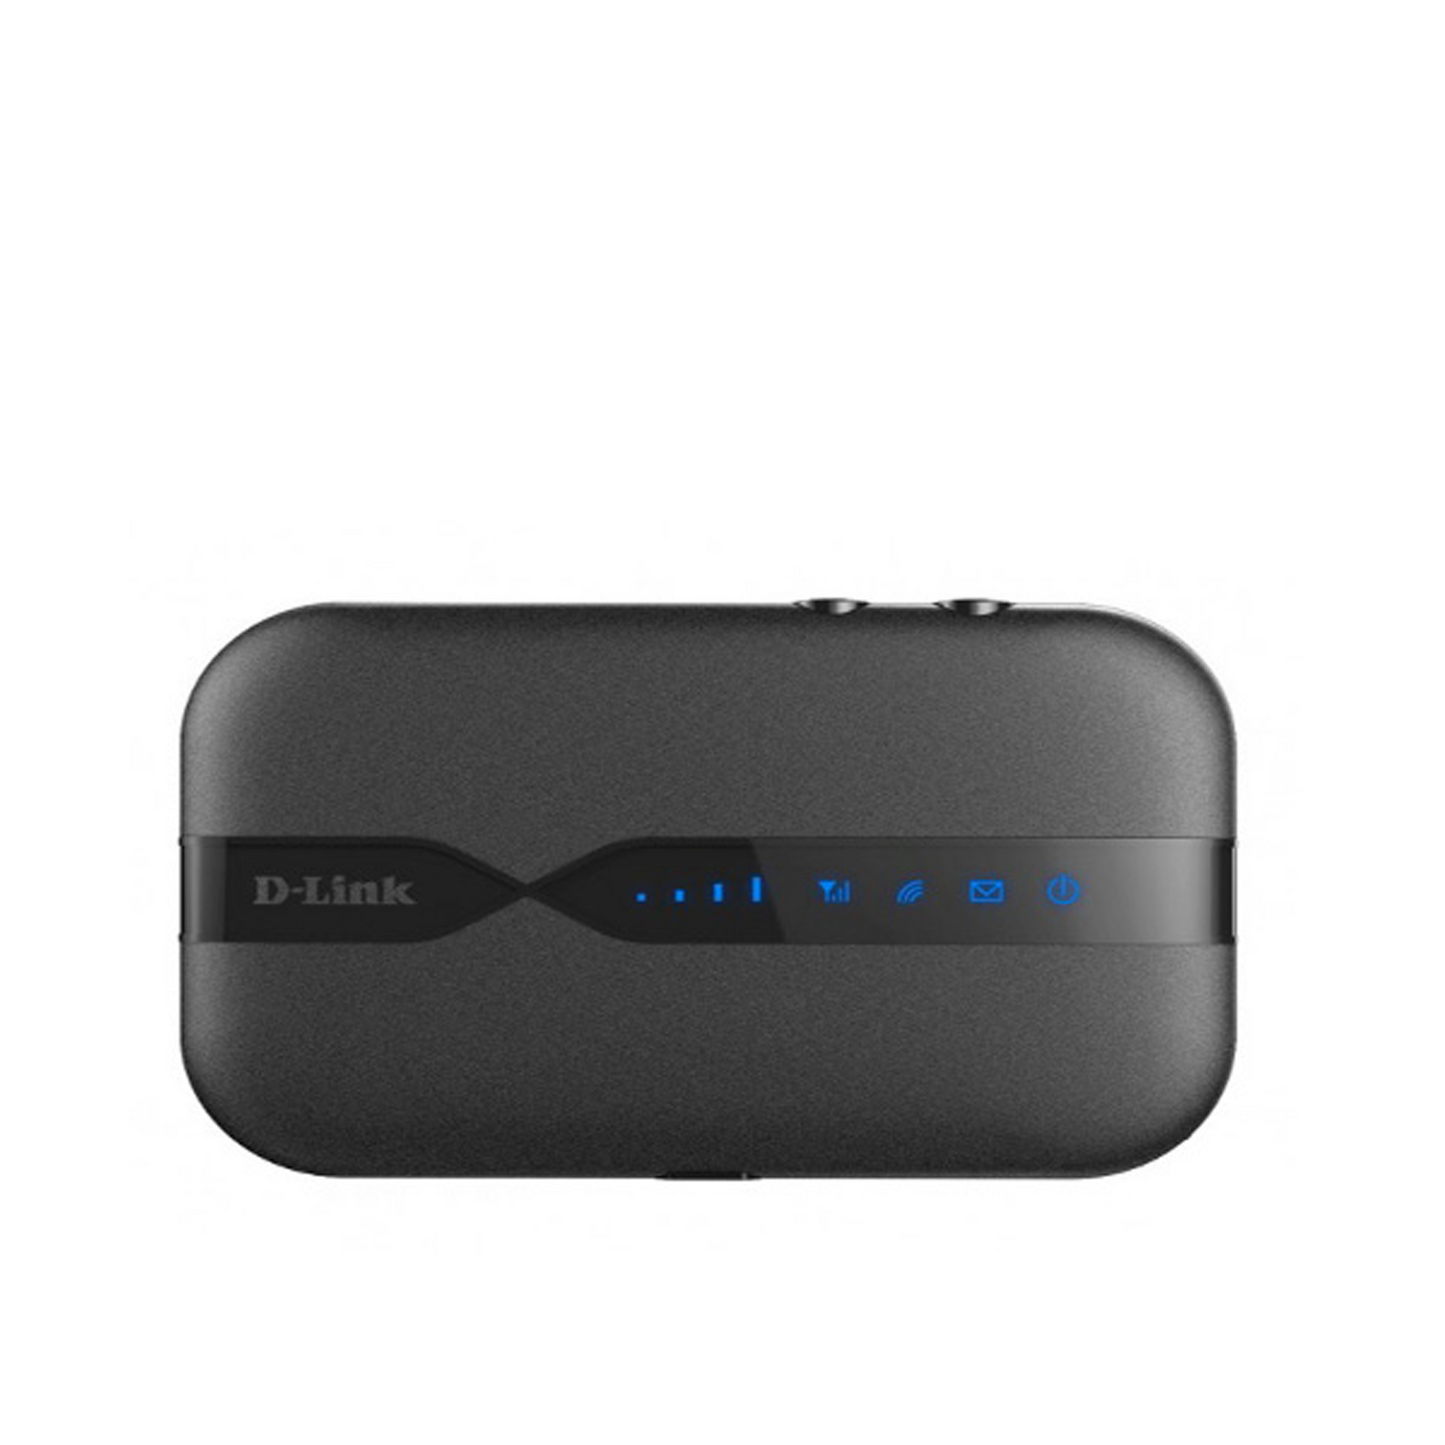 Pacific Computers on X: The DWR-932C 4G/LTE Mobile Router gives you  instant connectivity, all in a powerful yet portable device, that fits  easily into your pocket. Get in touch for more details